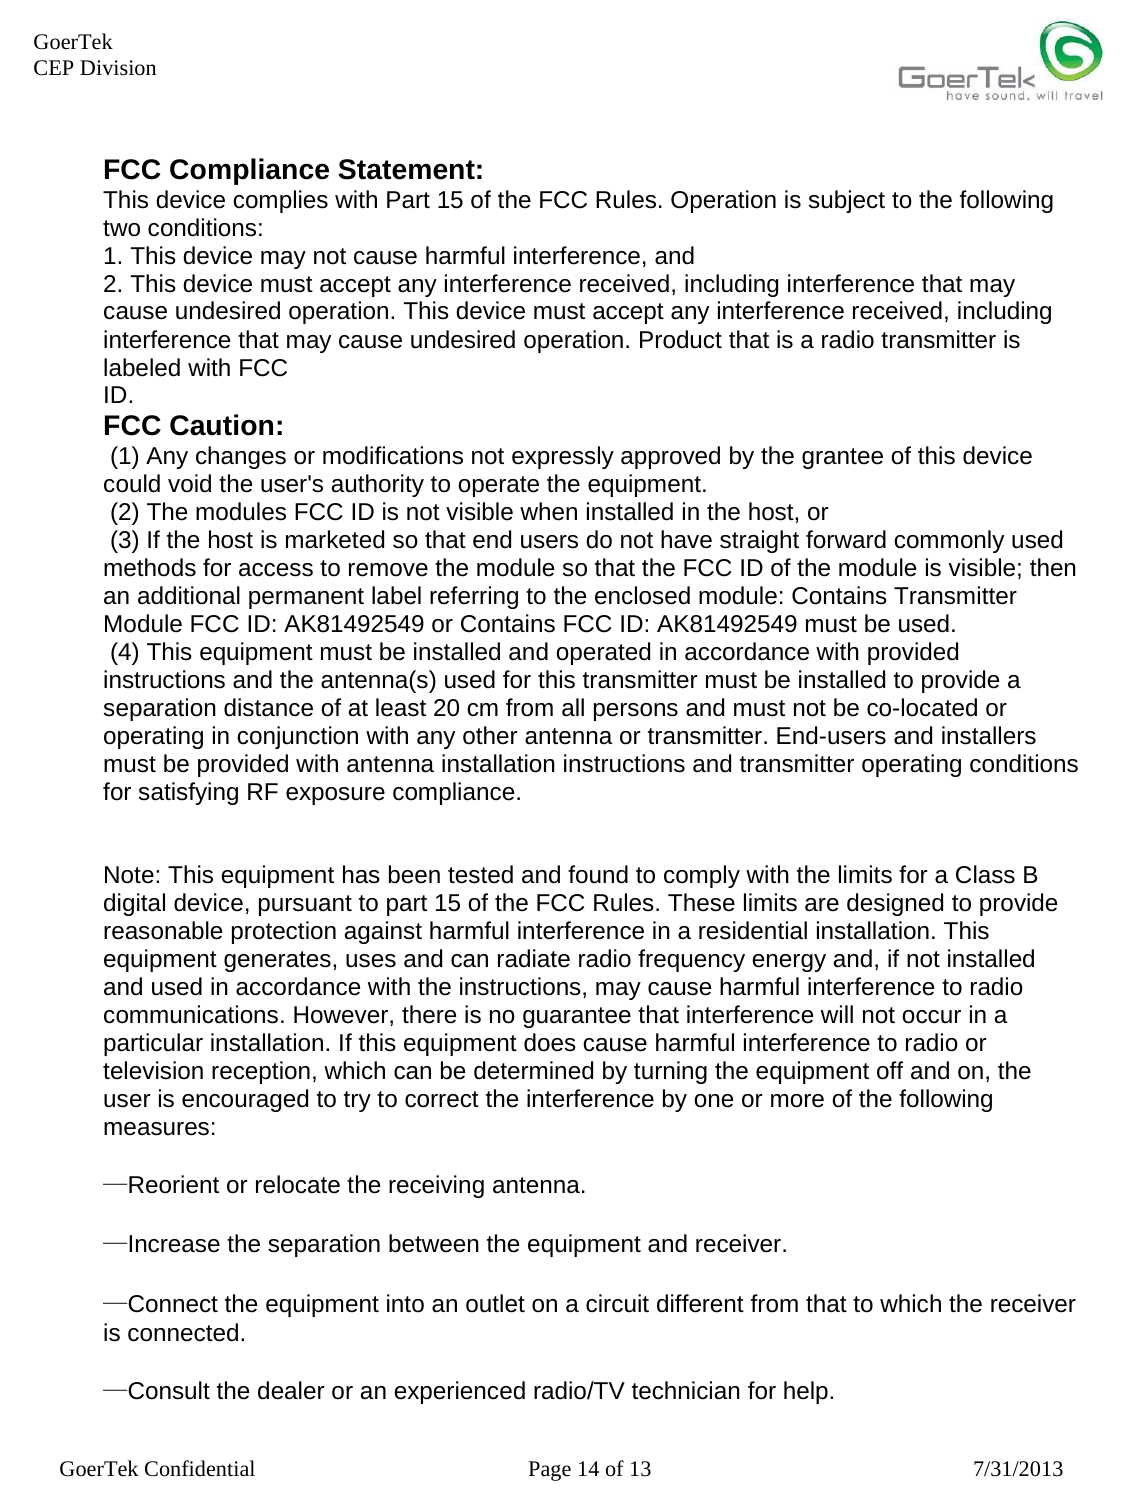     GoerTek Confidential  Page 14 of 13  7/31/2013 GoerTek  CEP Division FCC Compliance Statement: This device complies with Part 15 of the FCC Rules. Operation is subject to the following two conditions: 1. This device may not cause harmful interference, and 2. This device must accept any interference received, including interference that may cause undesired operation. This device must accept any interference received, including interference that may cause undesired operation. Product that is a radio transmitter is labeled with FCC ID. FCC Caution:  (1) Any changes or modifications not expressly approved by the grantee of this device could void the user&apos;s authority to operate the equipment.  (2) The modules FCC ID is not visible when installed in the host, or  (3) If the host is marketed so that end users do not have straight forward commonly used methods for access to remove the module so that the FCC ID of the module is visible; then an additional permanent label referring to the enclosed module: Contains Transmitter Module FCC ID: AK81492549 or Contains FCC ID: AK81492549 must be used.   (4) This equipment must be installed and operated in accordance with provided instructions and the antenna(s) used for this transmitter must be installed to provide a separation distance of at least 20 cm from all persons and must not be co-located or operating in conjunction with any other antenna or transmitter. End-users and installers must be provided with antenna installation instructions and transmitter operating conditions for satisfying RF exposure compliance.    Note: This equipment has been tested and found to comply with the limits for a Class B digital device, pursuant to part 15 of the FCC Rules. These limits are designed to provide reasonable protection against harmful interference in a residential installation. This equipment generates, uses and can radiate radio frequency energy and, if not installed and used in accordance with the instructions, may cause harmful interference to radio communications. However, there is no guarantee that interference will not occur in a particular installation. If this equipment does cause harmful interference to radio or television reception, which can be determined by turning the equipment off and on, the user is encouraged to try to correct the interference by one or more of the following measures:  —Reorient or relocate the receiving antenna.  —Increase the separation between the equipment and receiver.  —Connect the equipment into an outlet on a circuit different from that to which the receiver is connected.  —Consult the dealer or an experienced radio/TV technician for help.  